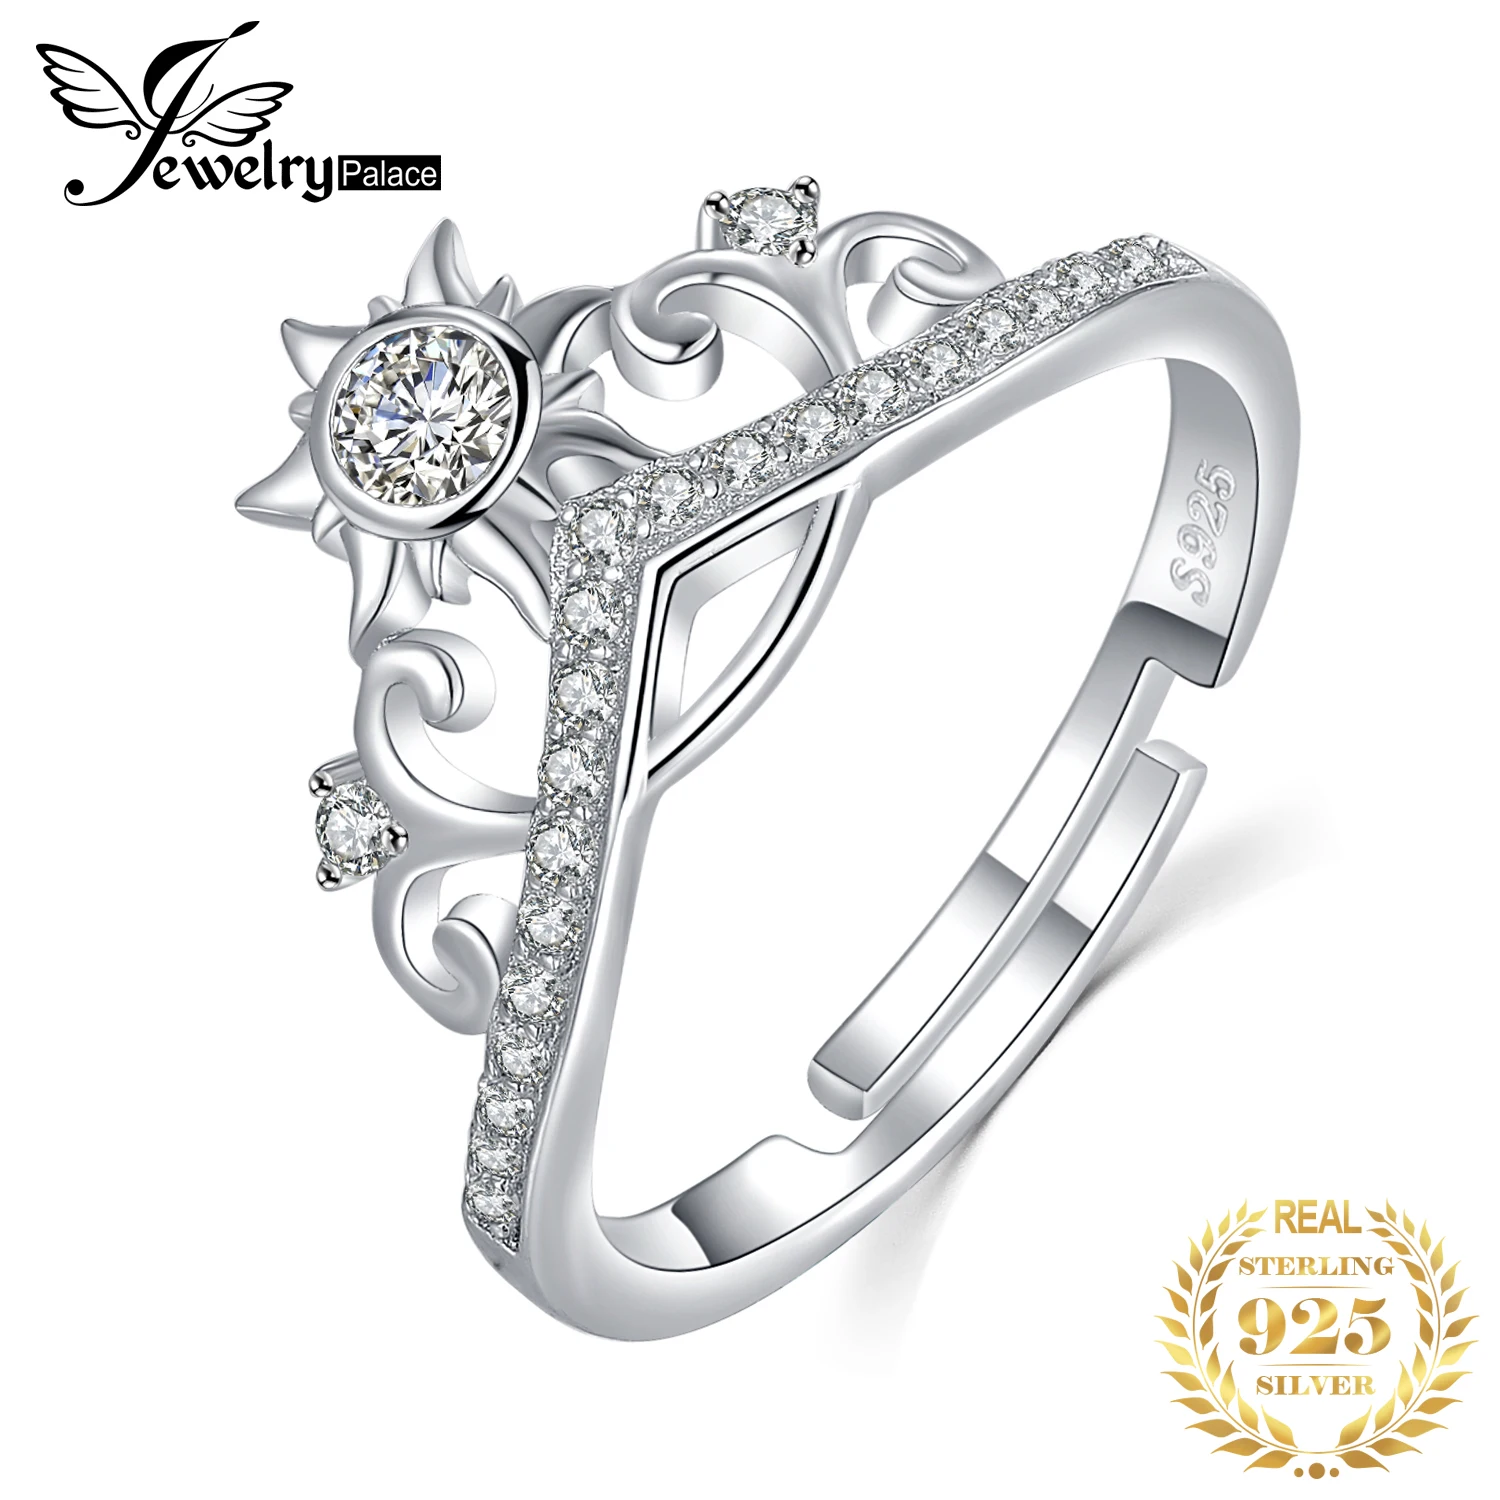 

JewelryPalace Cubic Zirconia Tiara Crown Adjustable Open Ring 925 Sterling Silver Rings for Women Jewelry Making Engagemen Rings